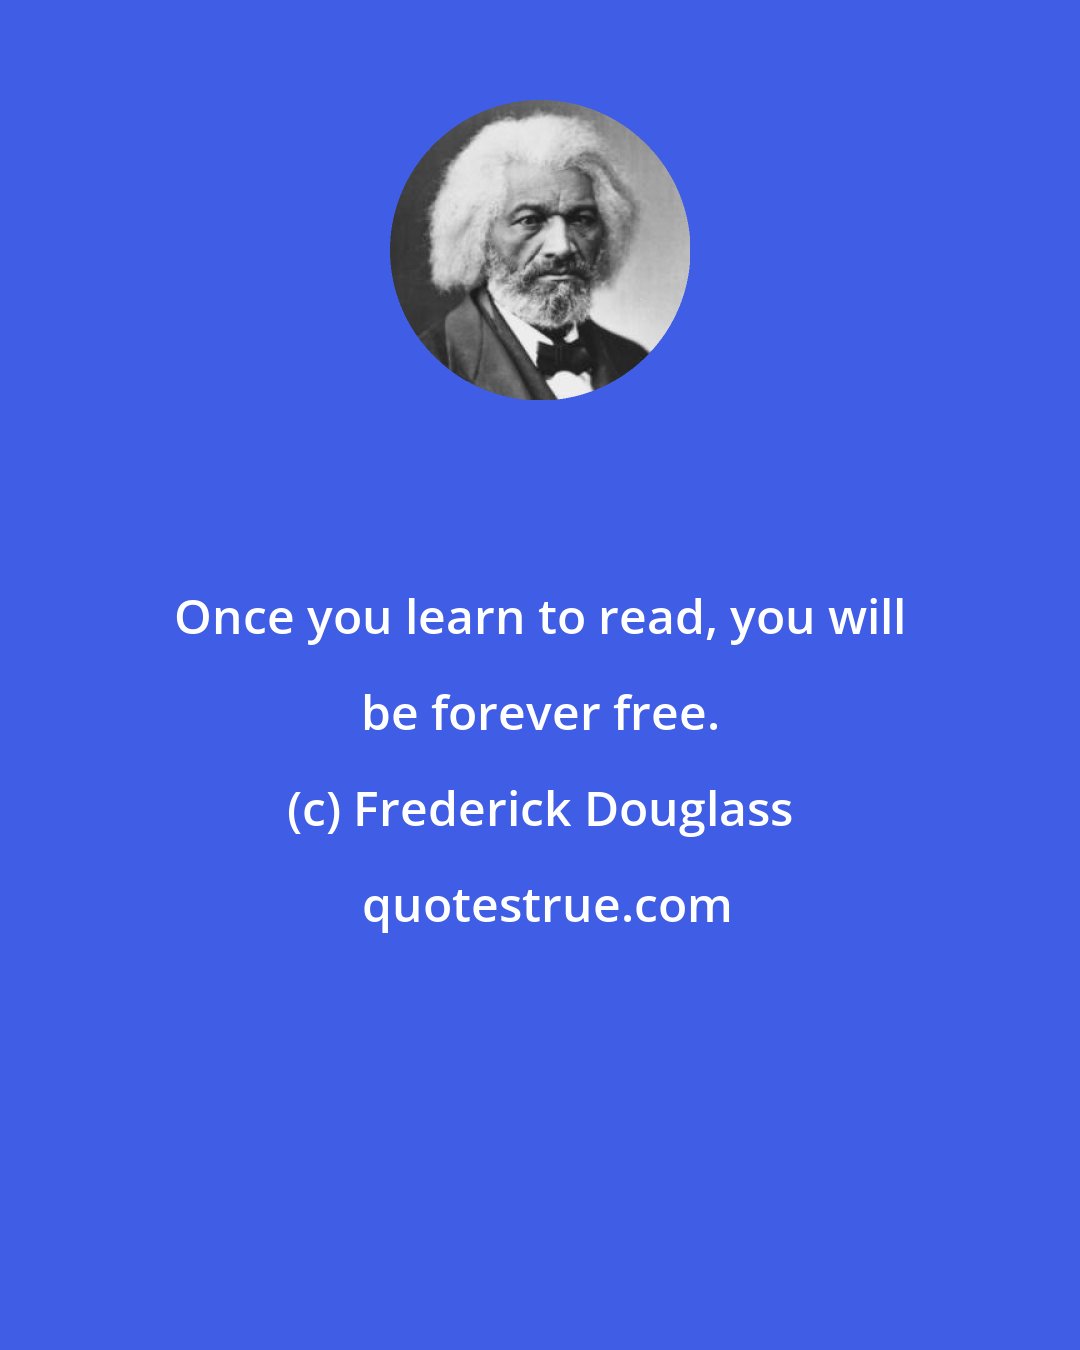 Frederick Douglass: Once you learn to read, you will be forever free.